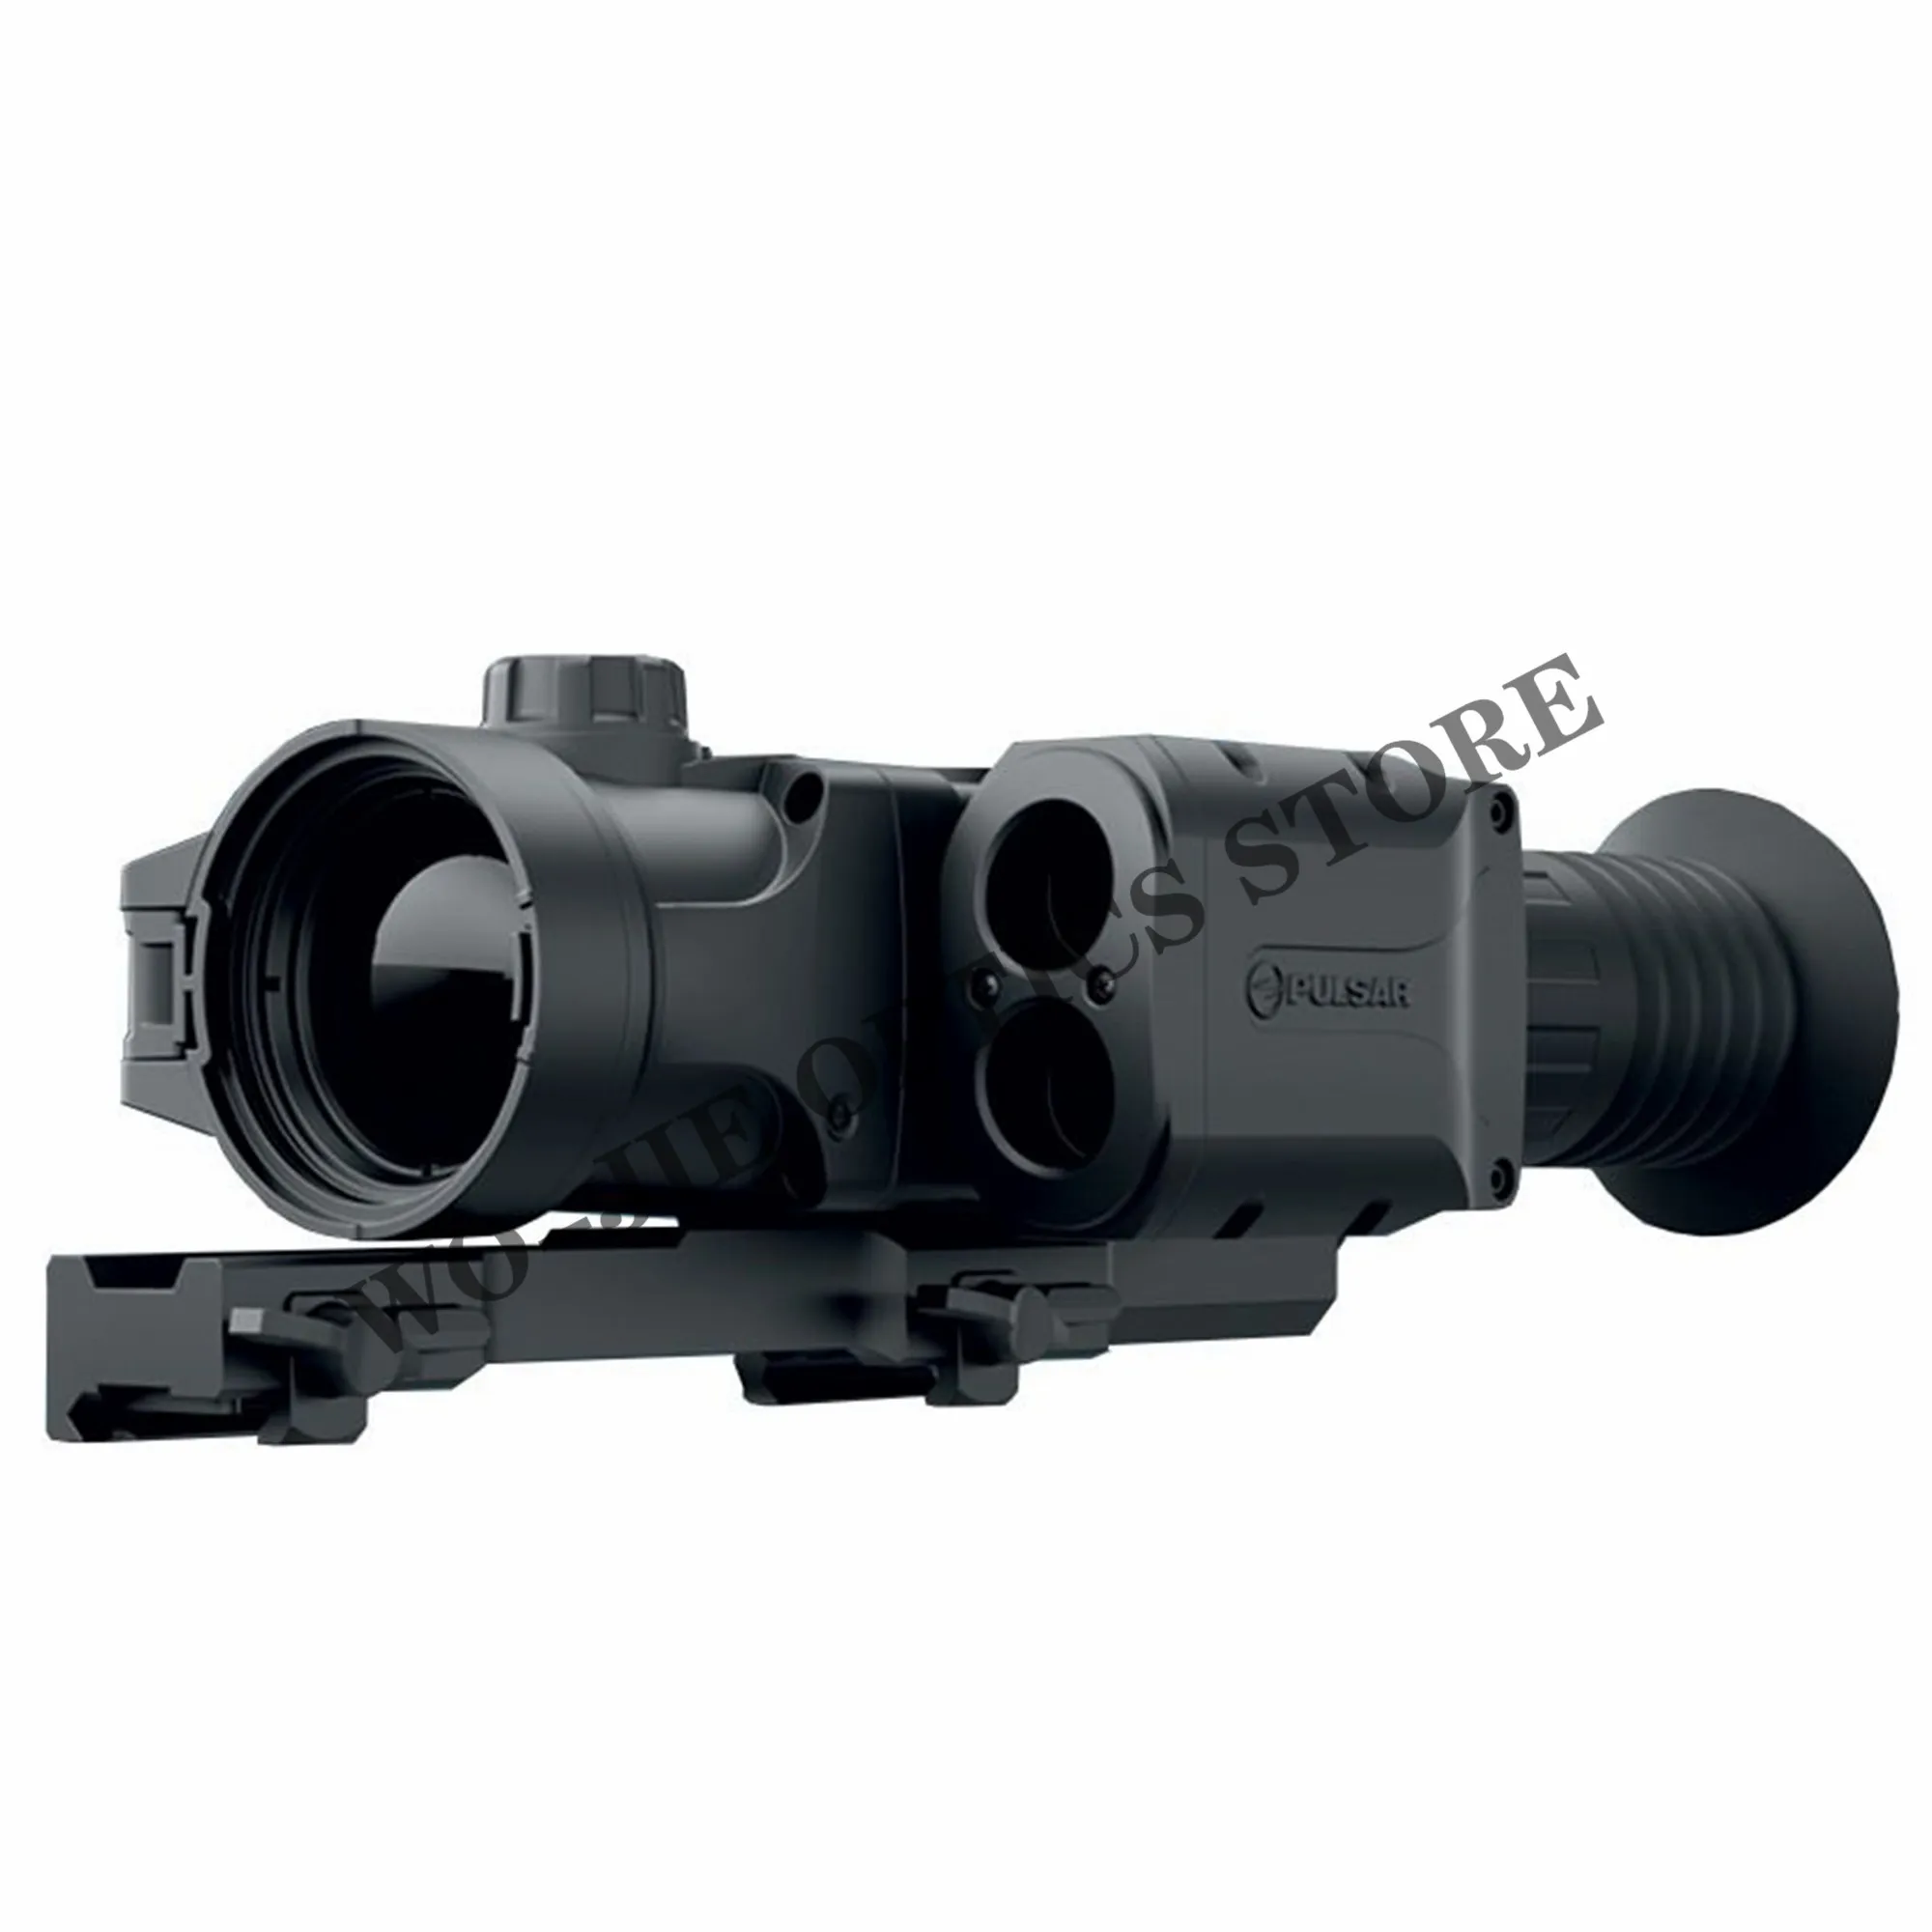 

PULSAR Trail XQ50 LRF Thermal Imaging scope for Hunting shooting optical sights for pcp air gun, Black